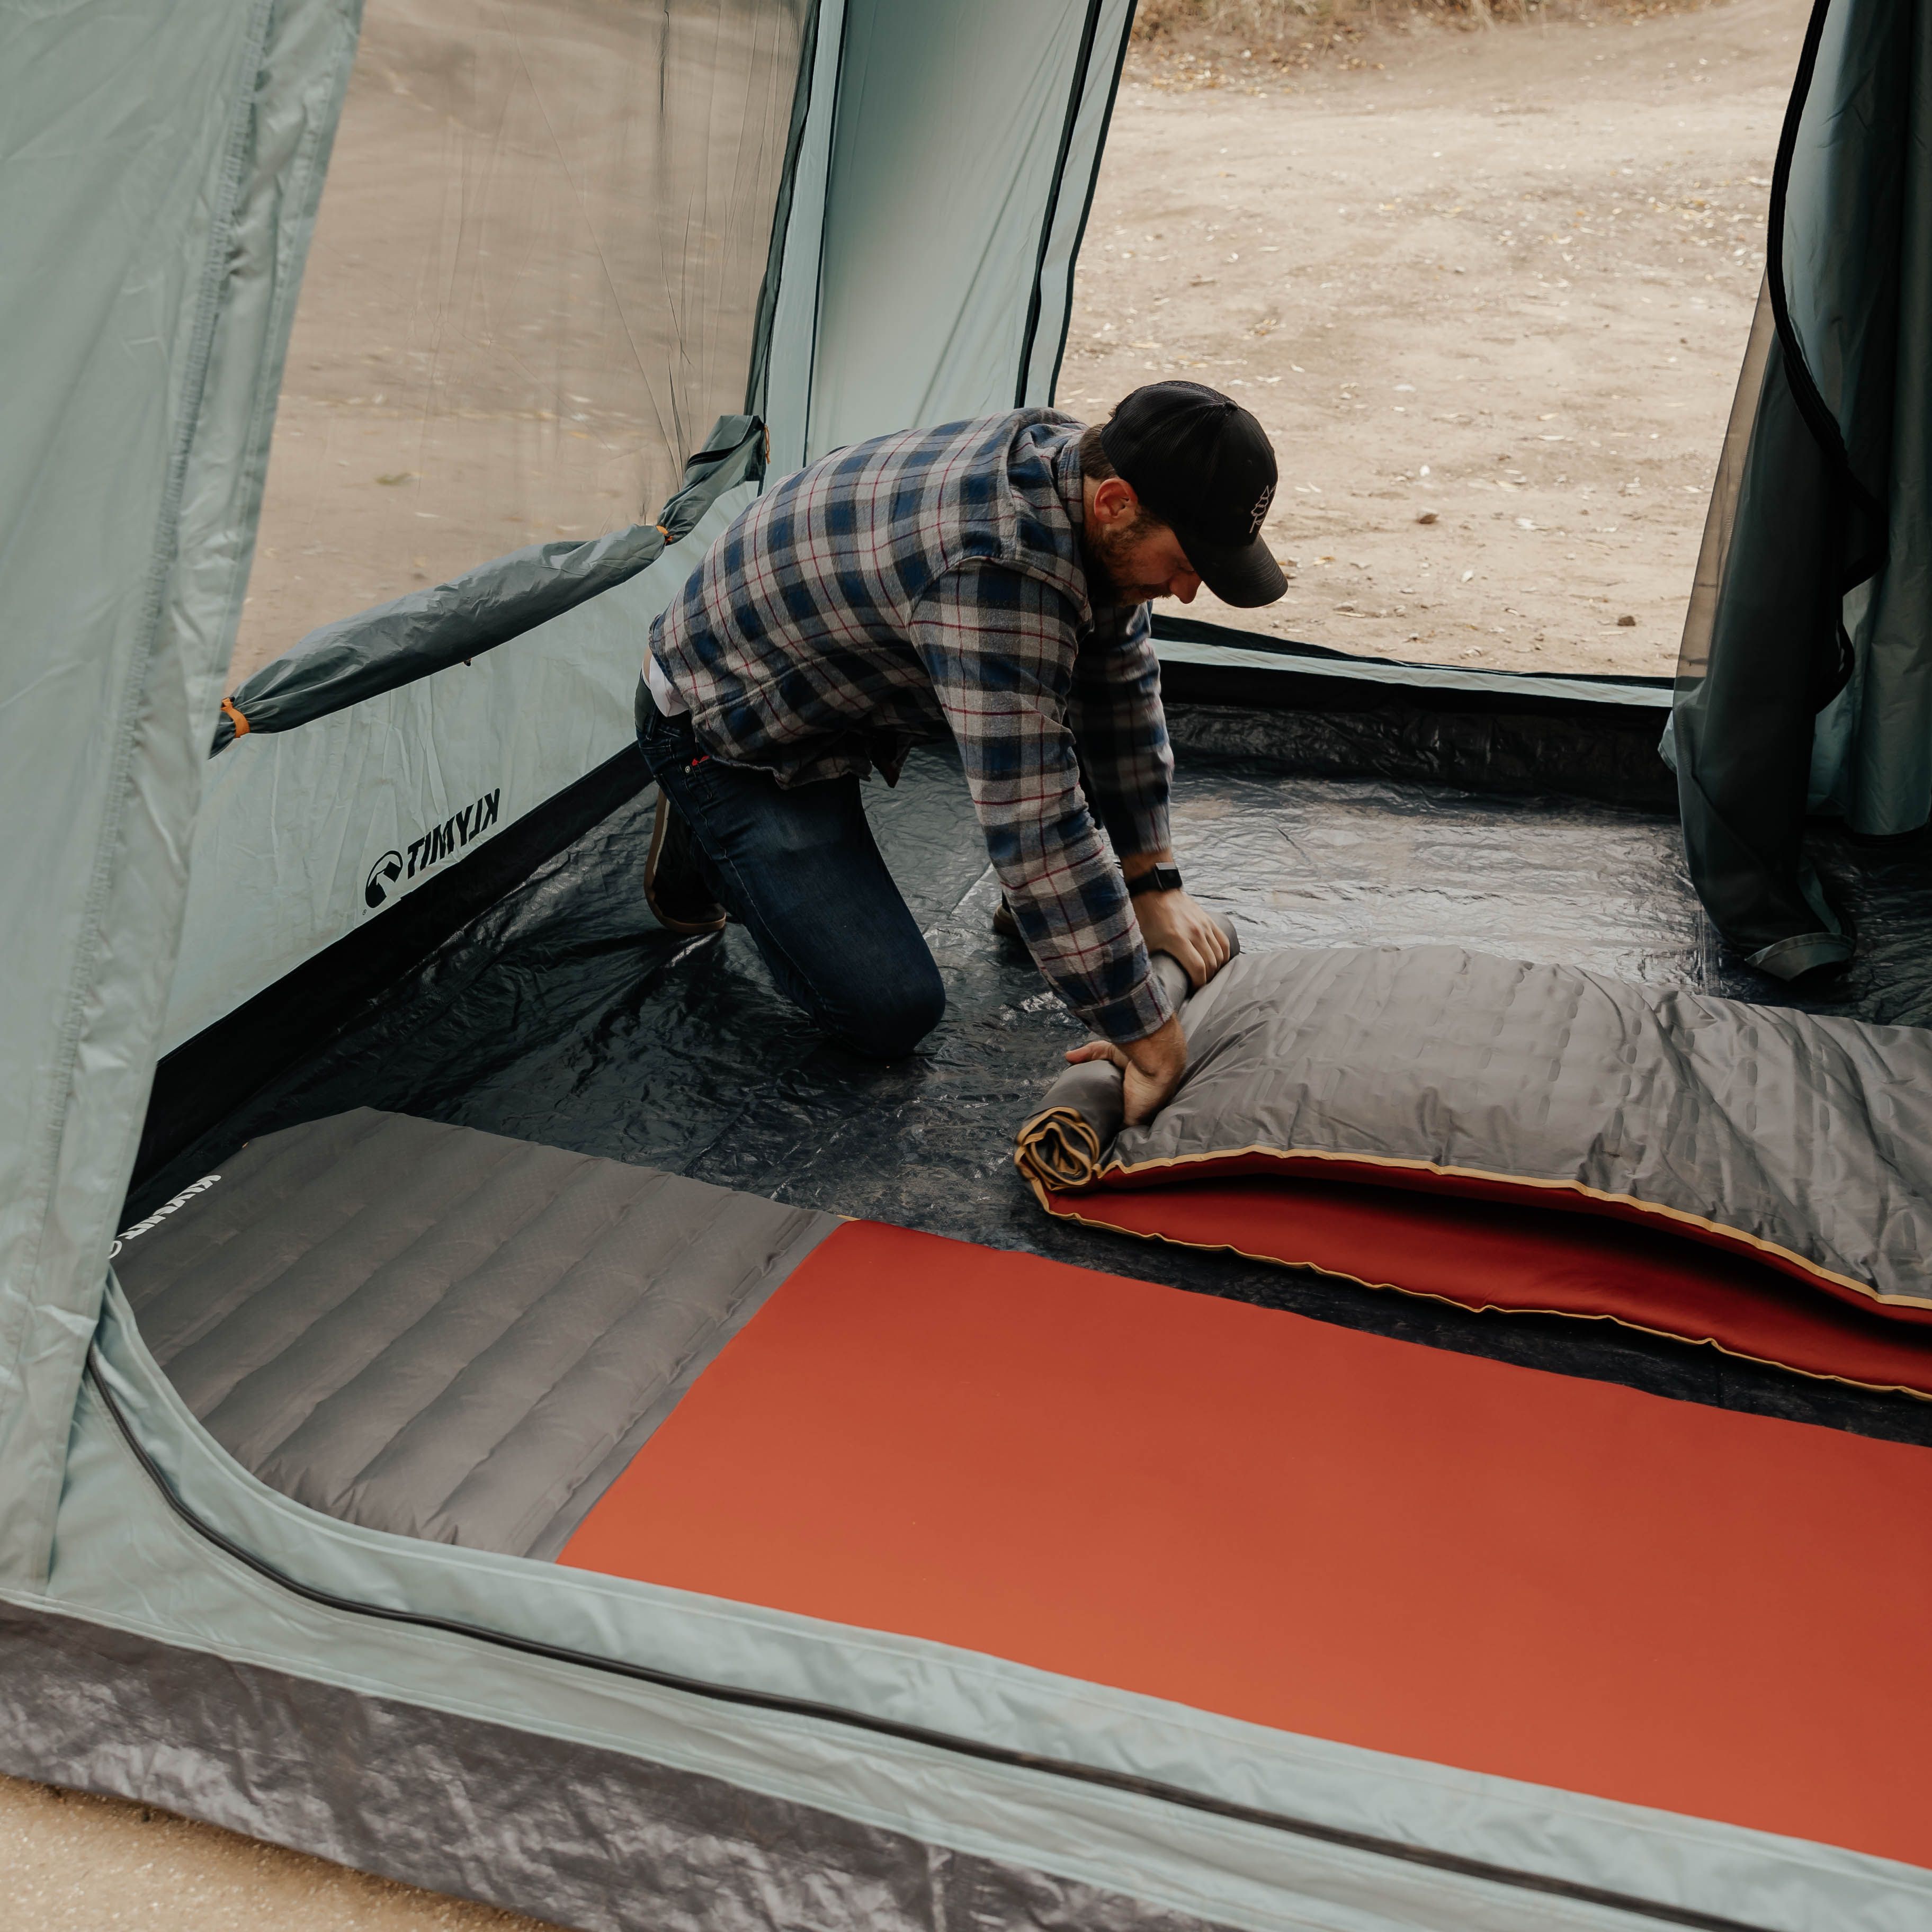 Timber Creek SUV Tent, Teal, Lifestyle Image